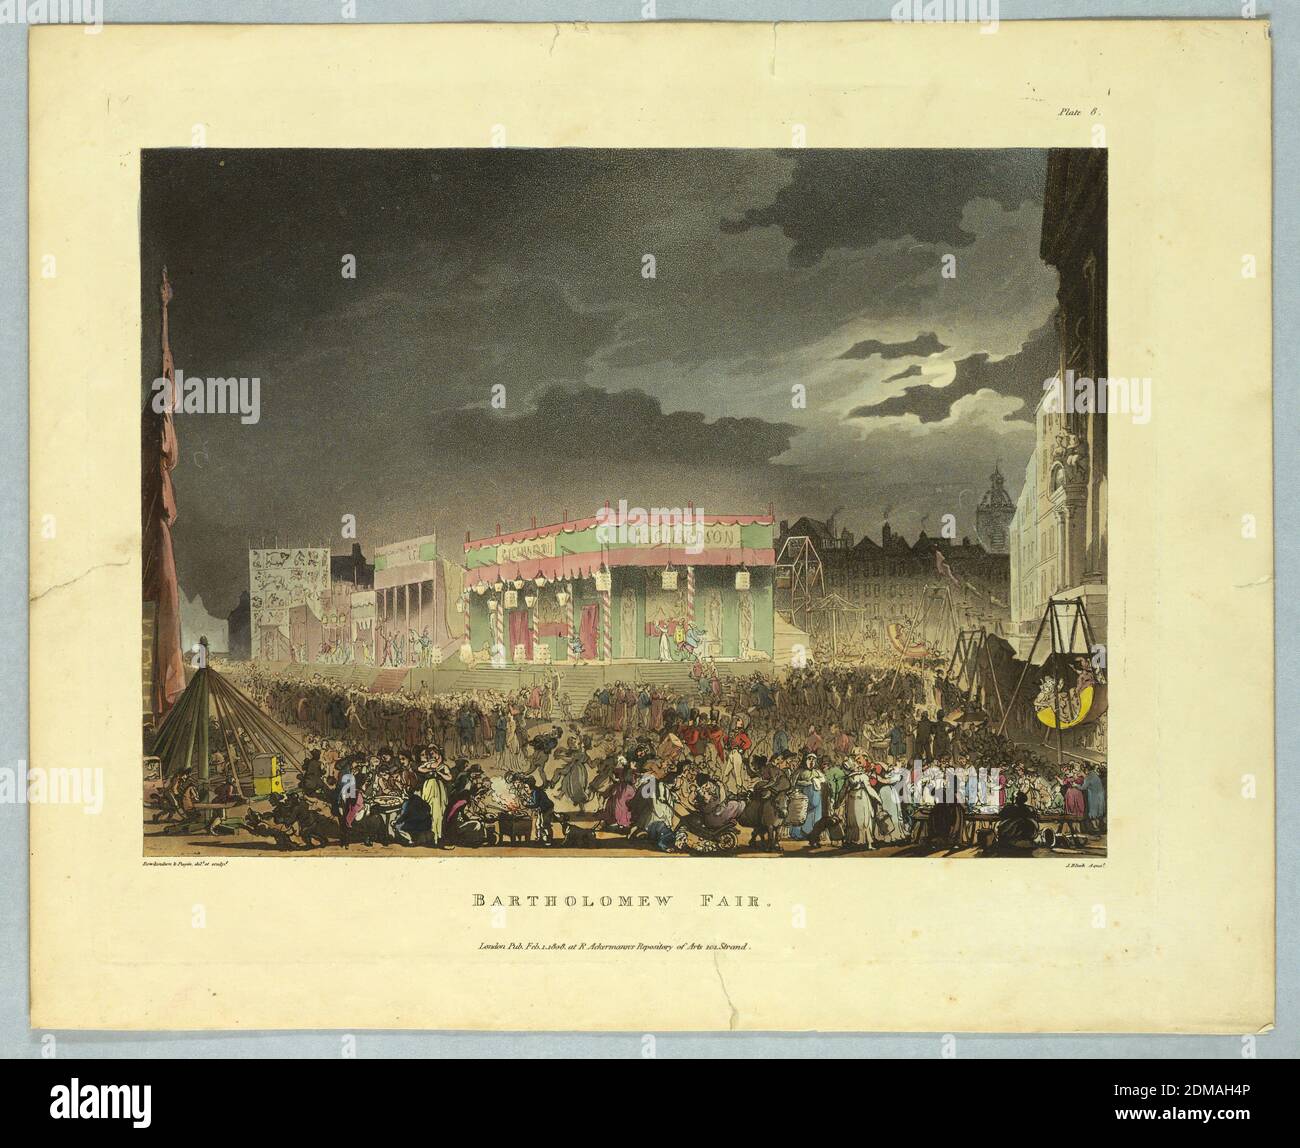 Bartholomew Fair, from 'Ackermann's Repository', Thomas Rowlandson, British, 1756–1827, Augustus Charles Pugin, French, active Great Britain, ca. 1762–1832, John Bluck, British, 1791–1832, Aquatint, brush and watercolors on paper, Night scene of the fairground, extremely crowded. In foreground, small concessions with rides left and right. Center left, tents for amusements and oddities. Title, artists', and publisher's names below., Europe, London, England, 1808, Print Stock Photo